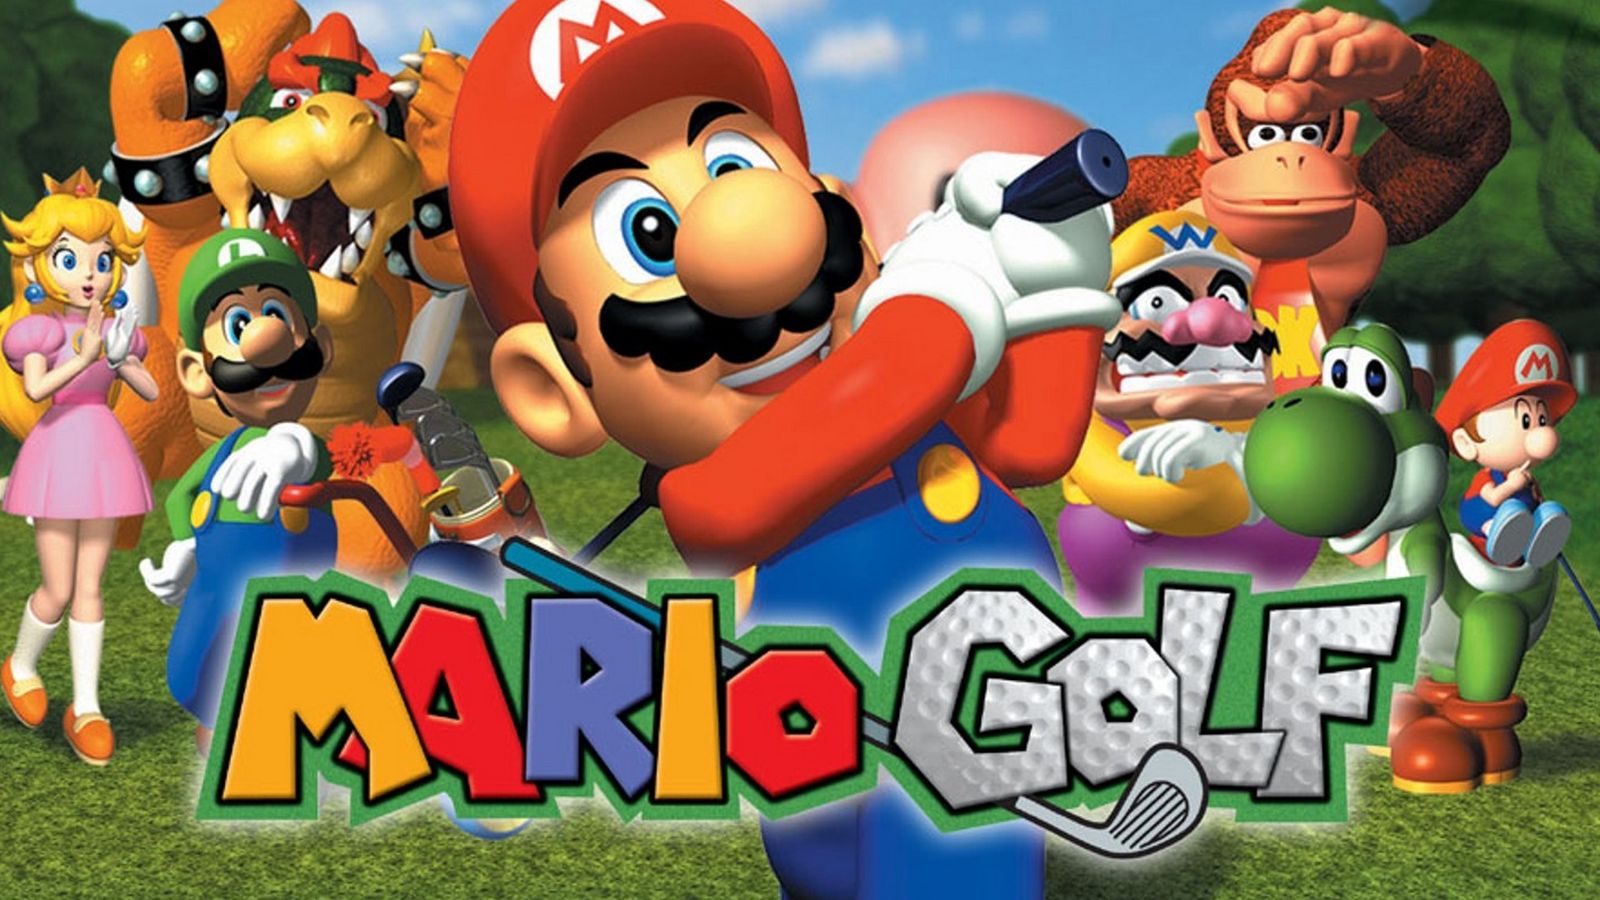 Mario Golf is dropping the club's contents next week on Nintendo Switch Online